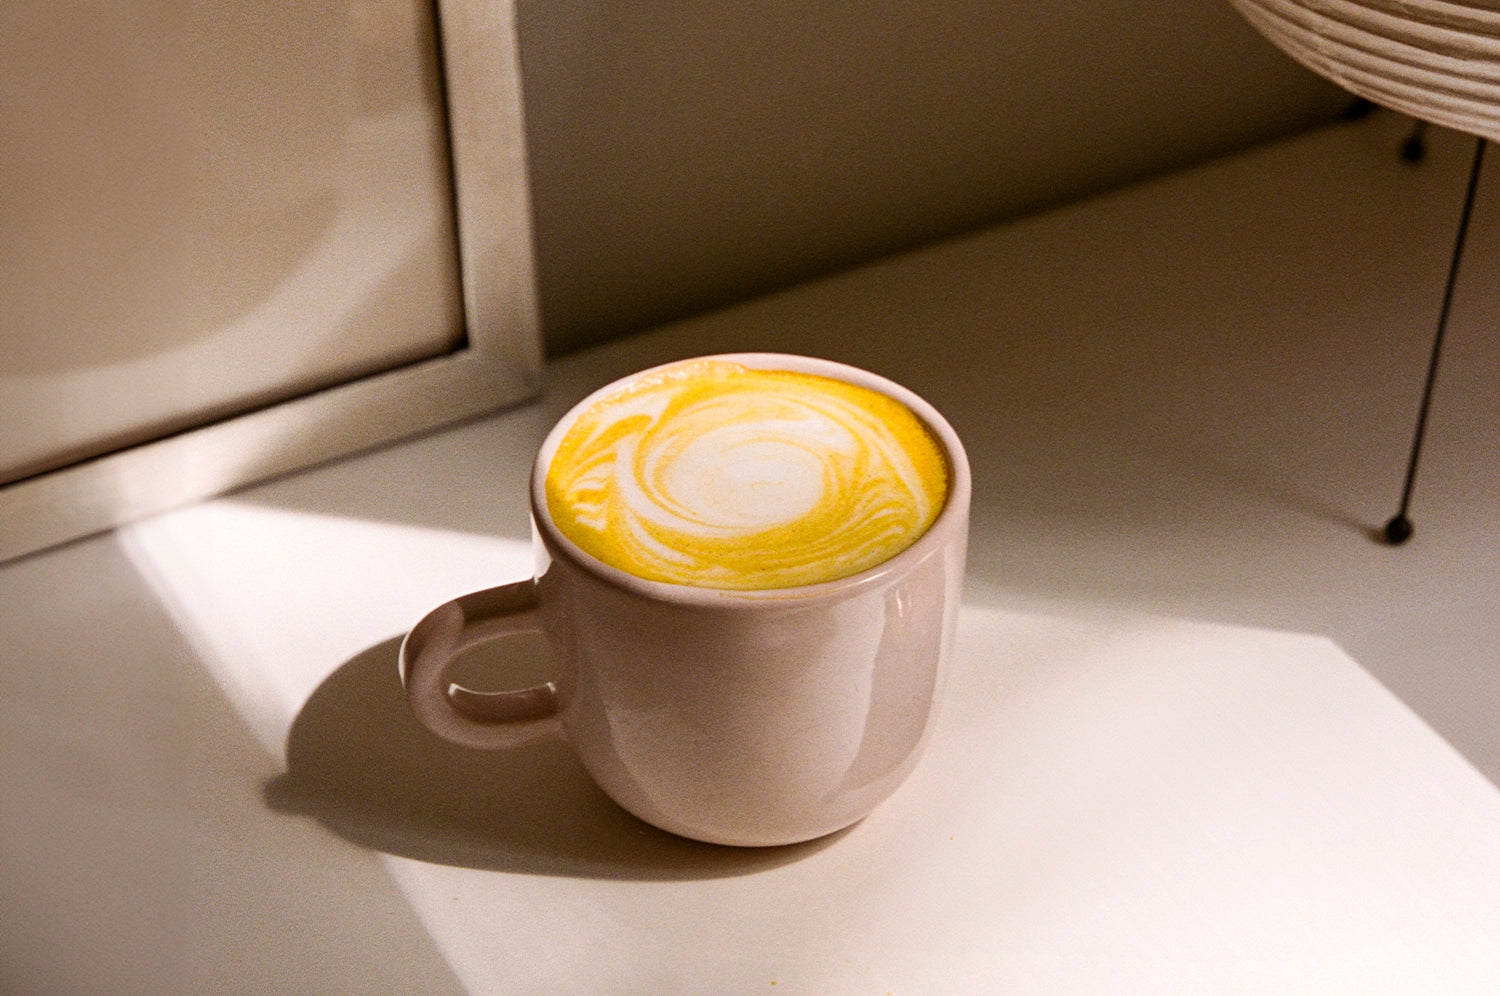 An image of a saffron latte made with The Fullest's Warm Feelings Saffron Latte mix, served in a white mug on a countertop. 